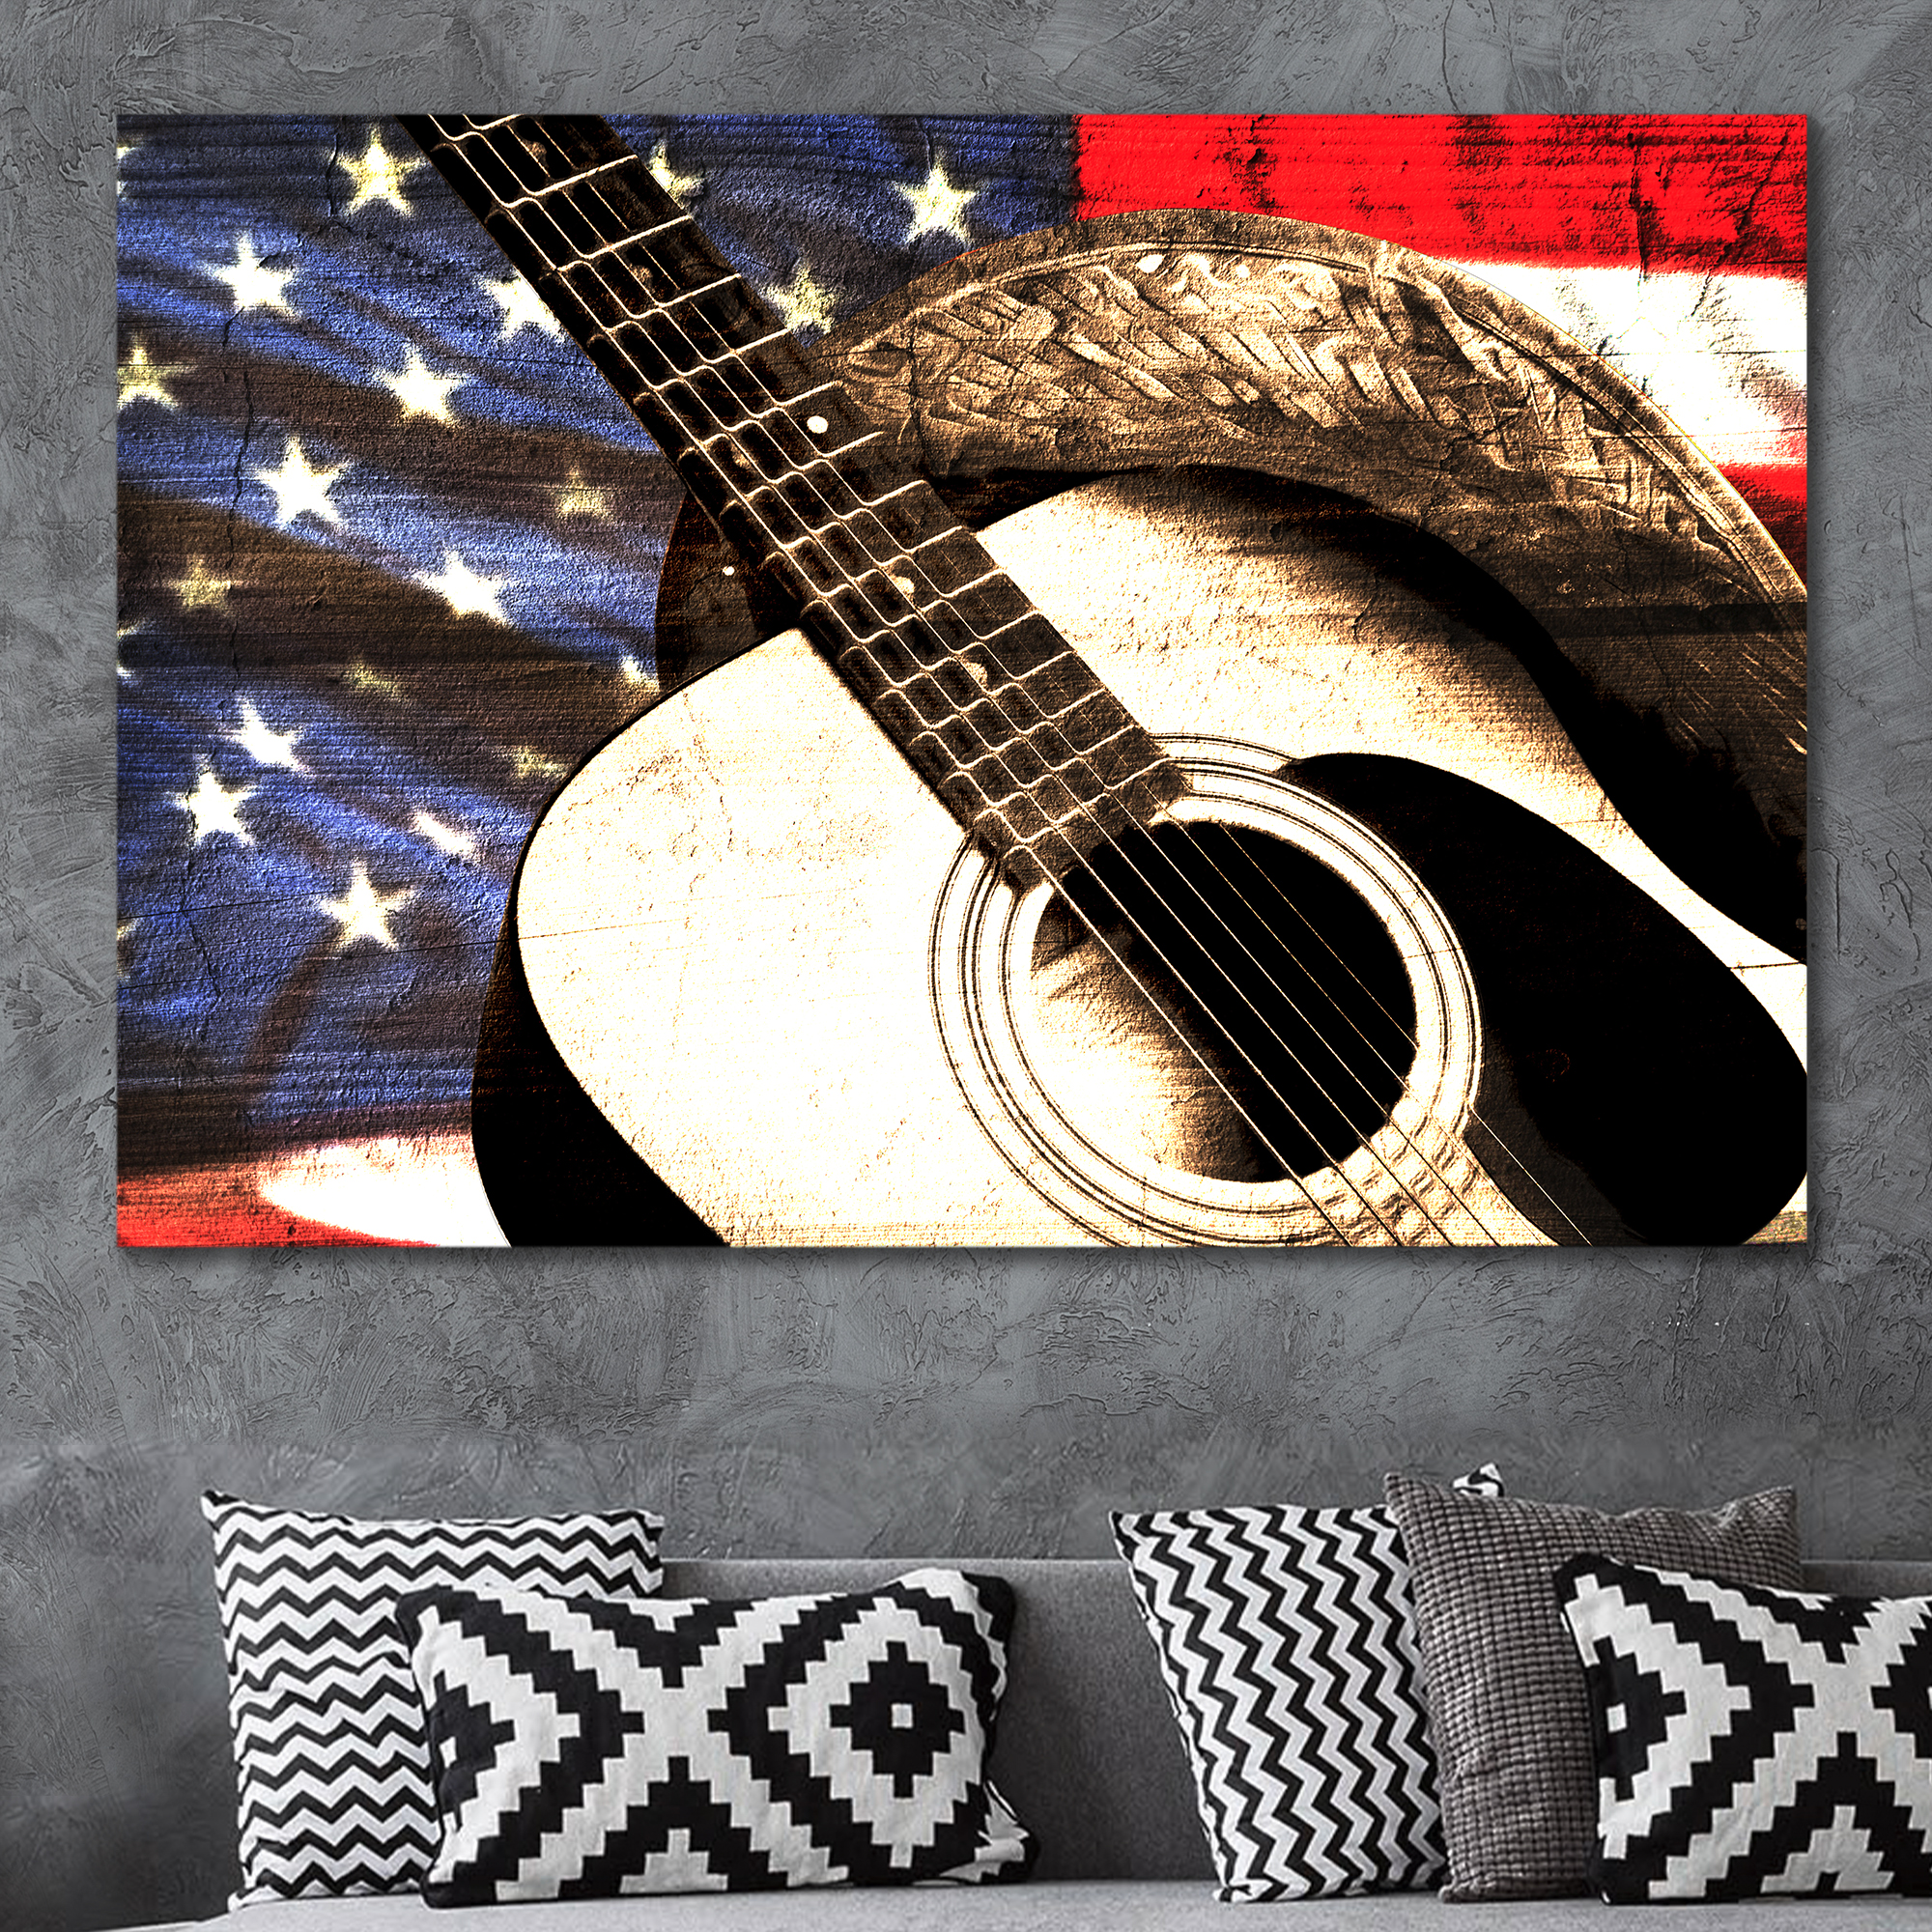 Rustic American style country pride american flag and guitar music decor ideas